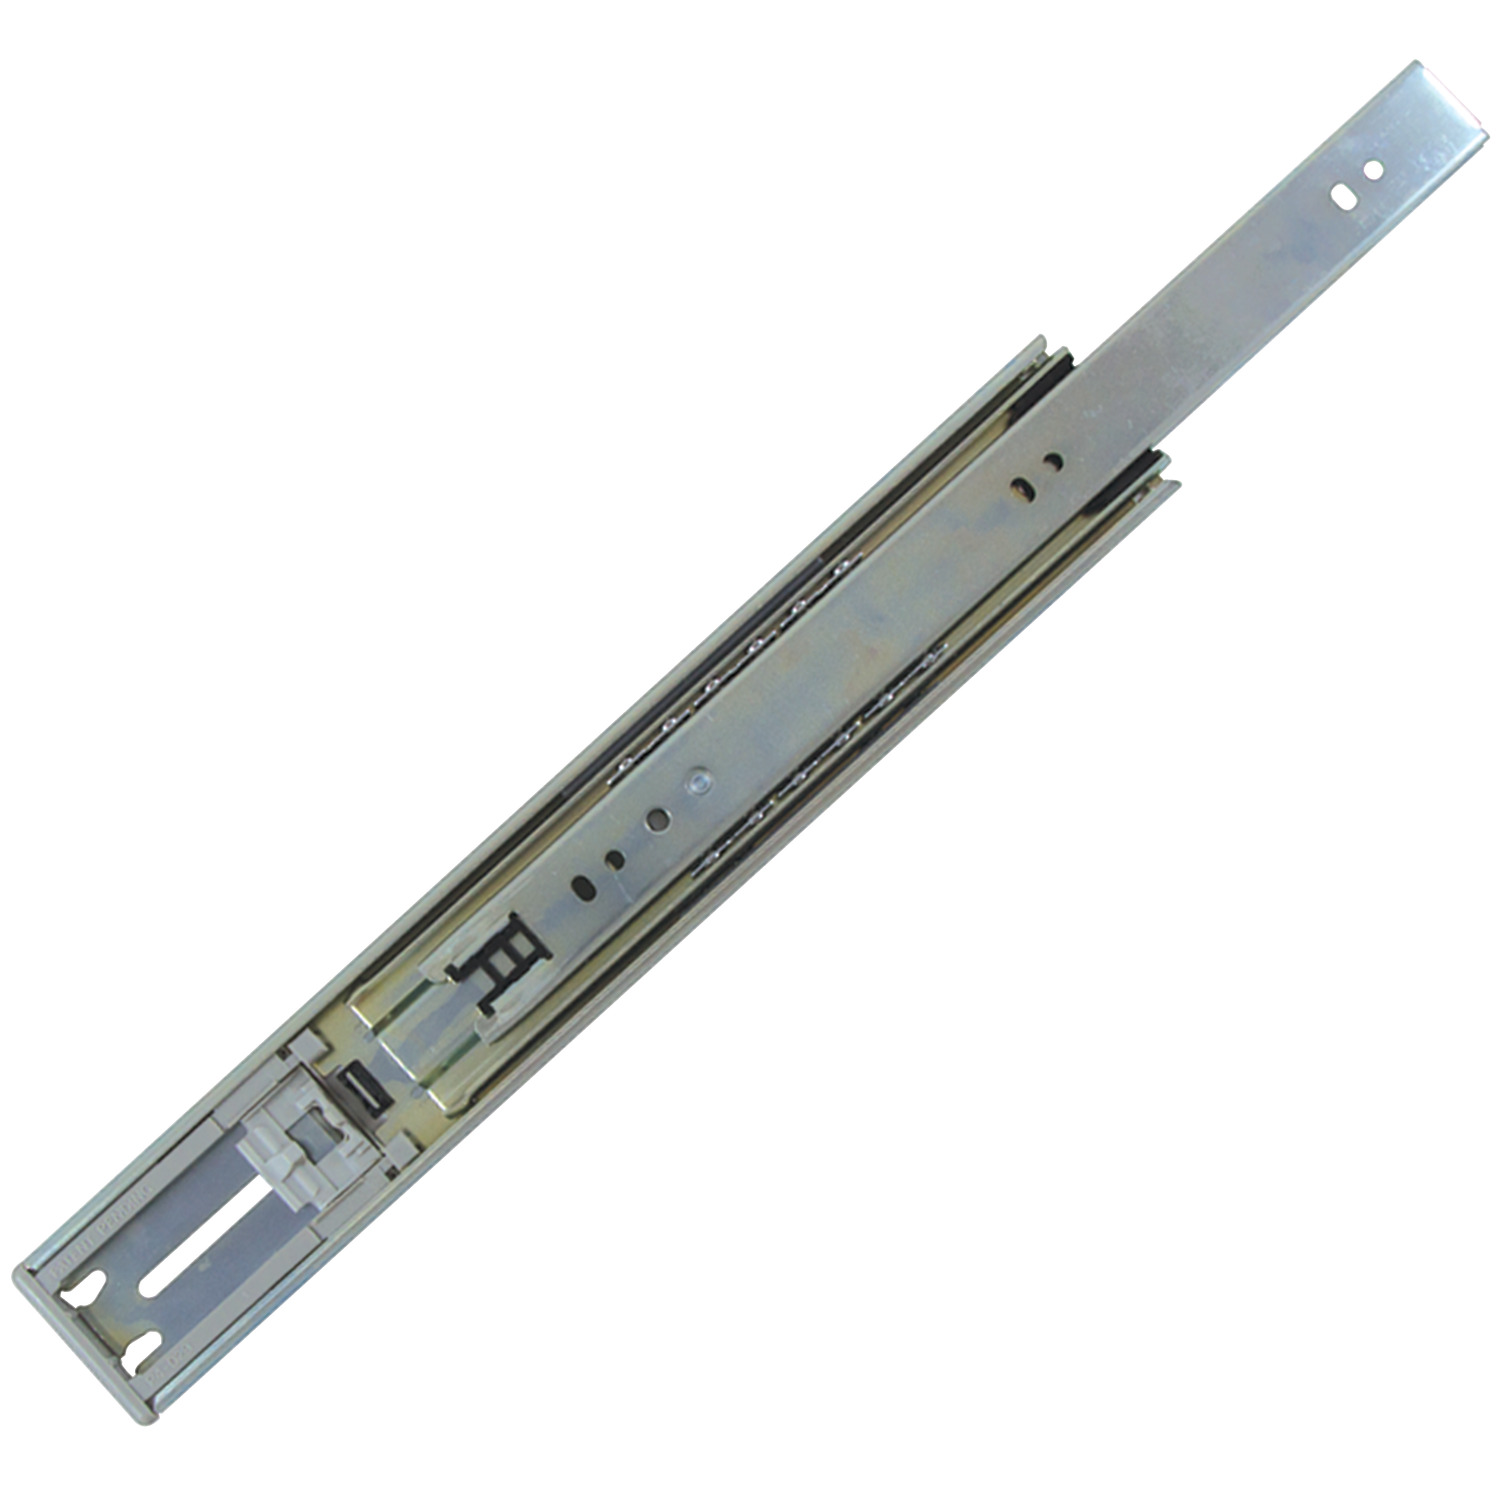 P4100.AC0300 Drawer Slide Full Extn Length 300; Load 45kg per pair. Sold Individually. Lever Disconnect; Soft Close